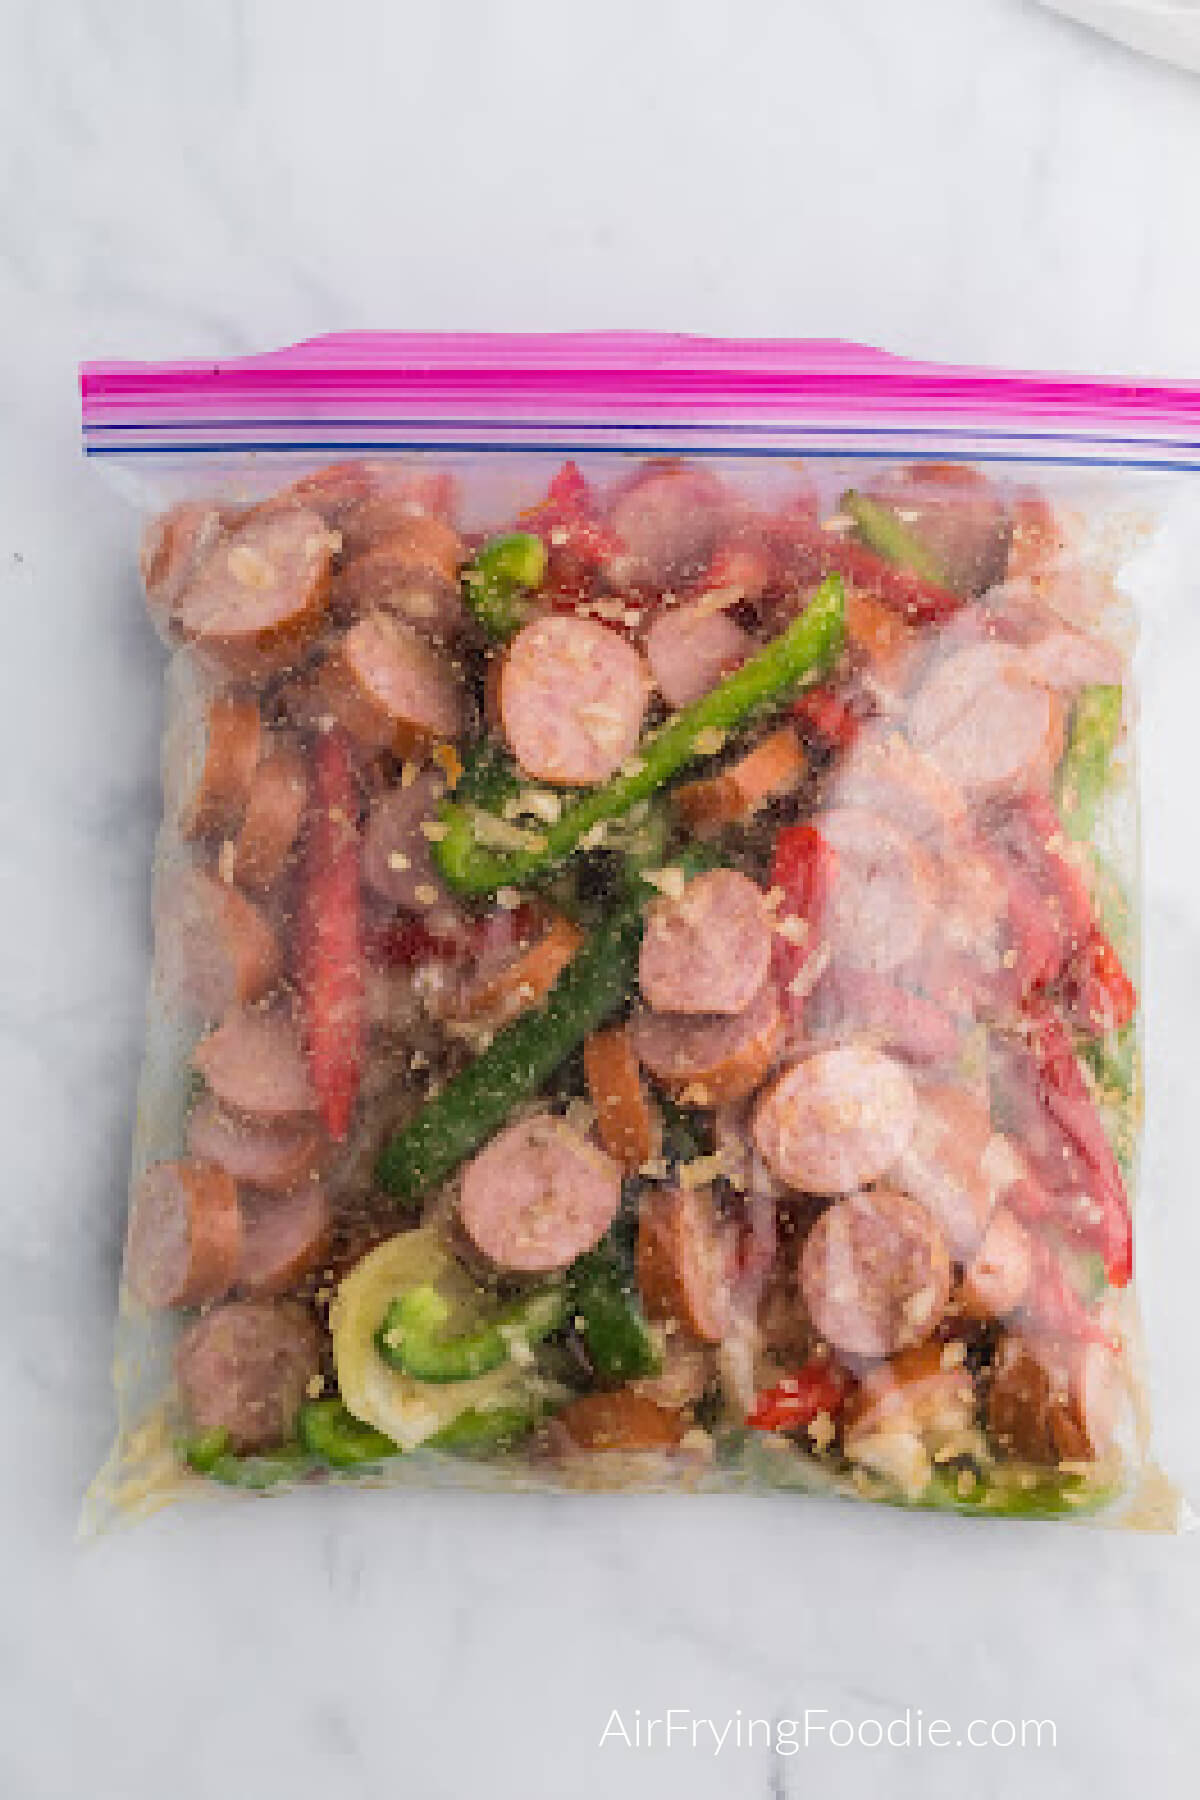 Ingredients tossed and coated in a sealable bag and ready to cook.